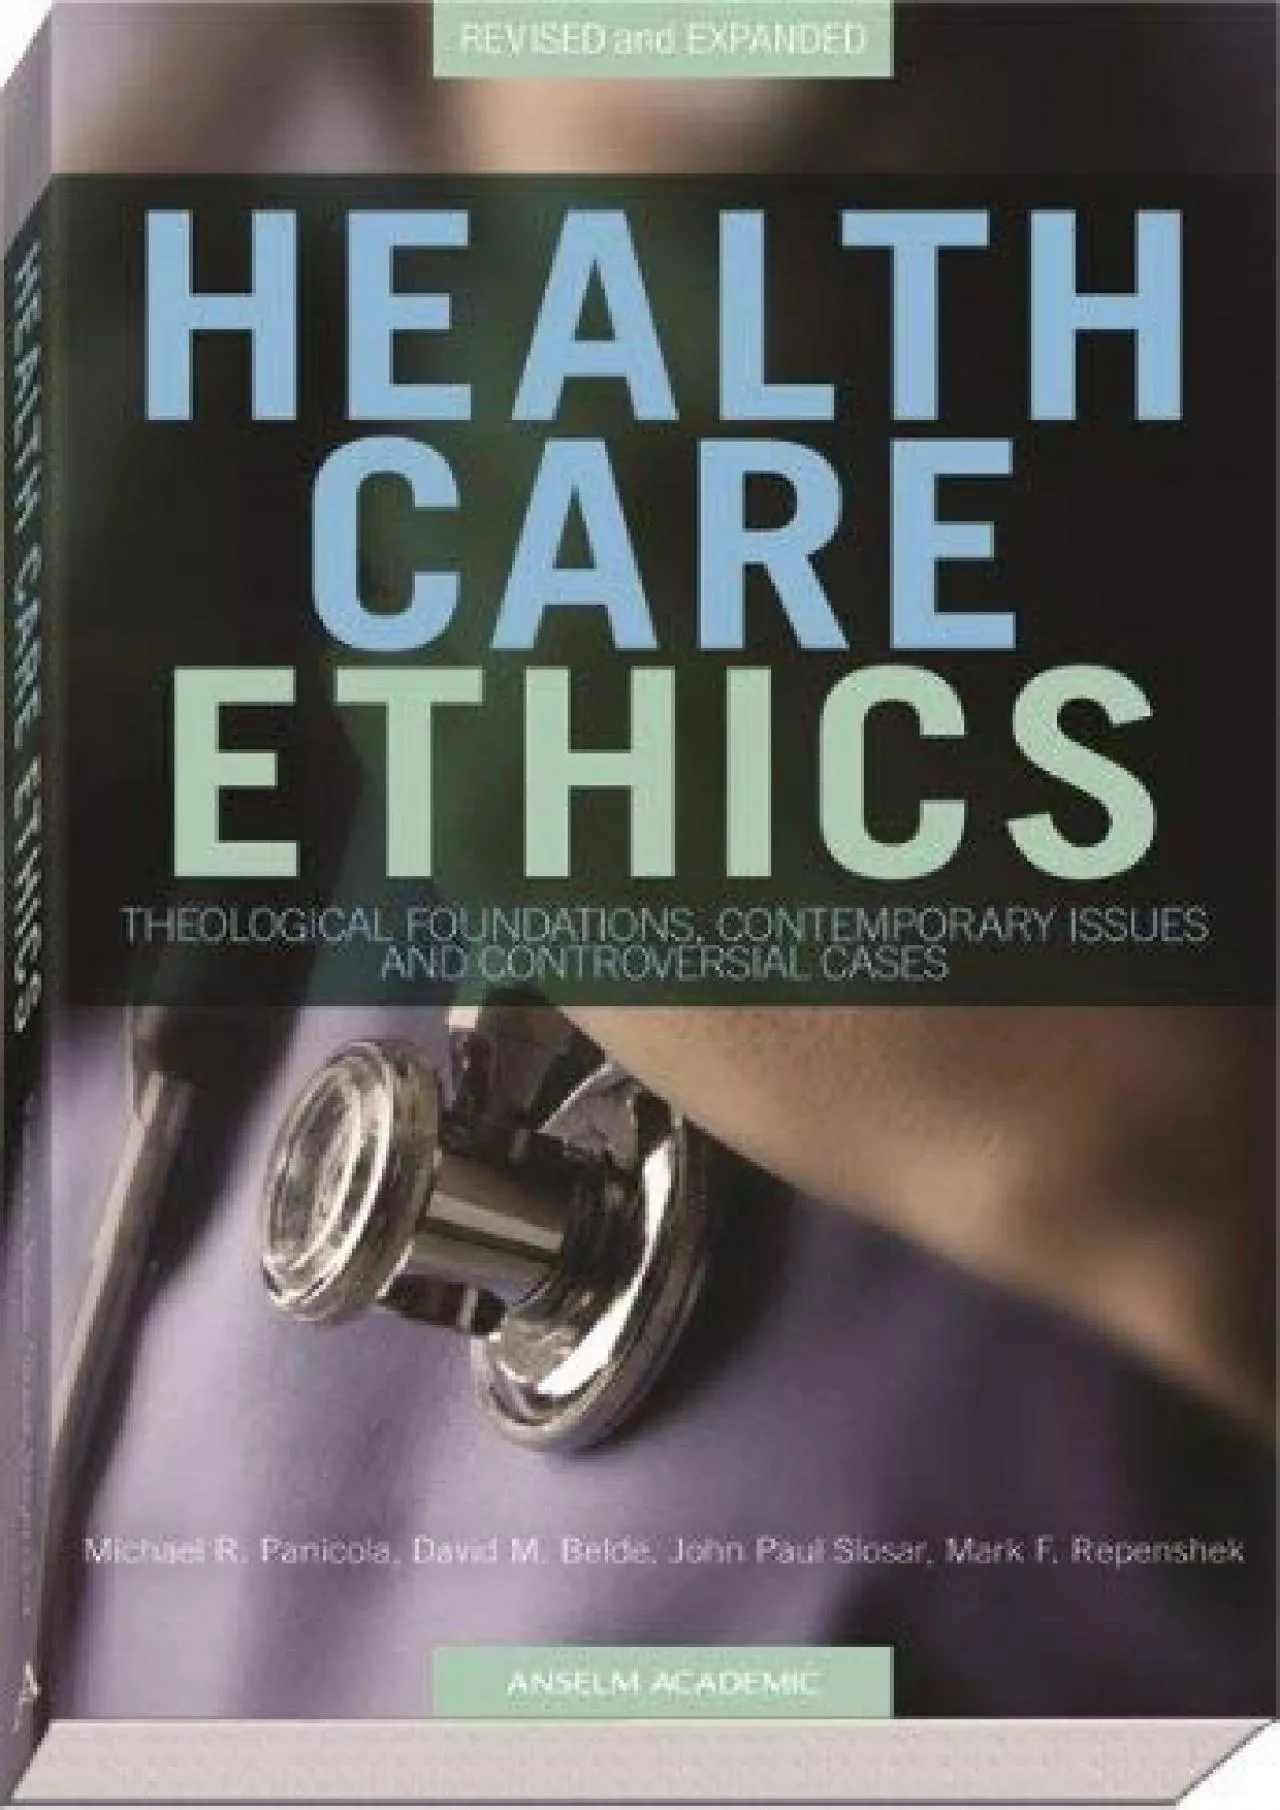 (BOOK)-Health Care Ethics: Theological Foundations, Contemporary Issues, and Controversial